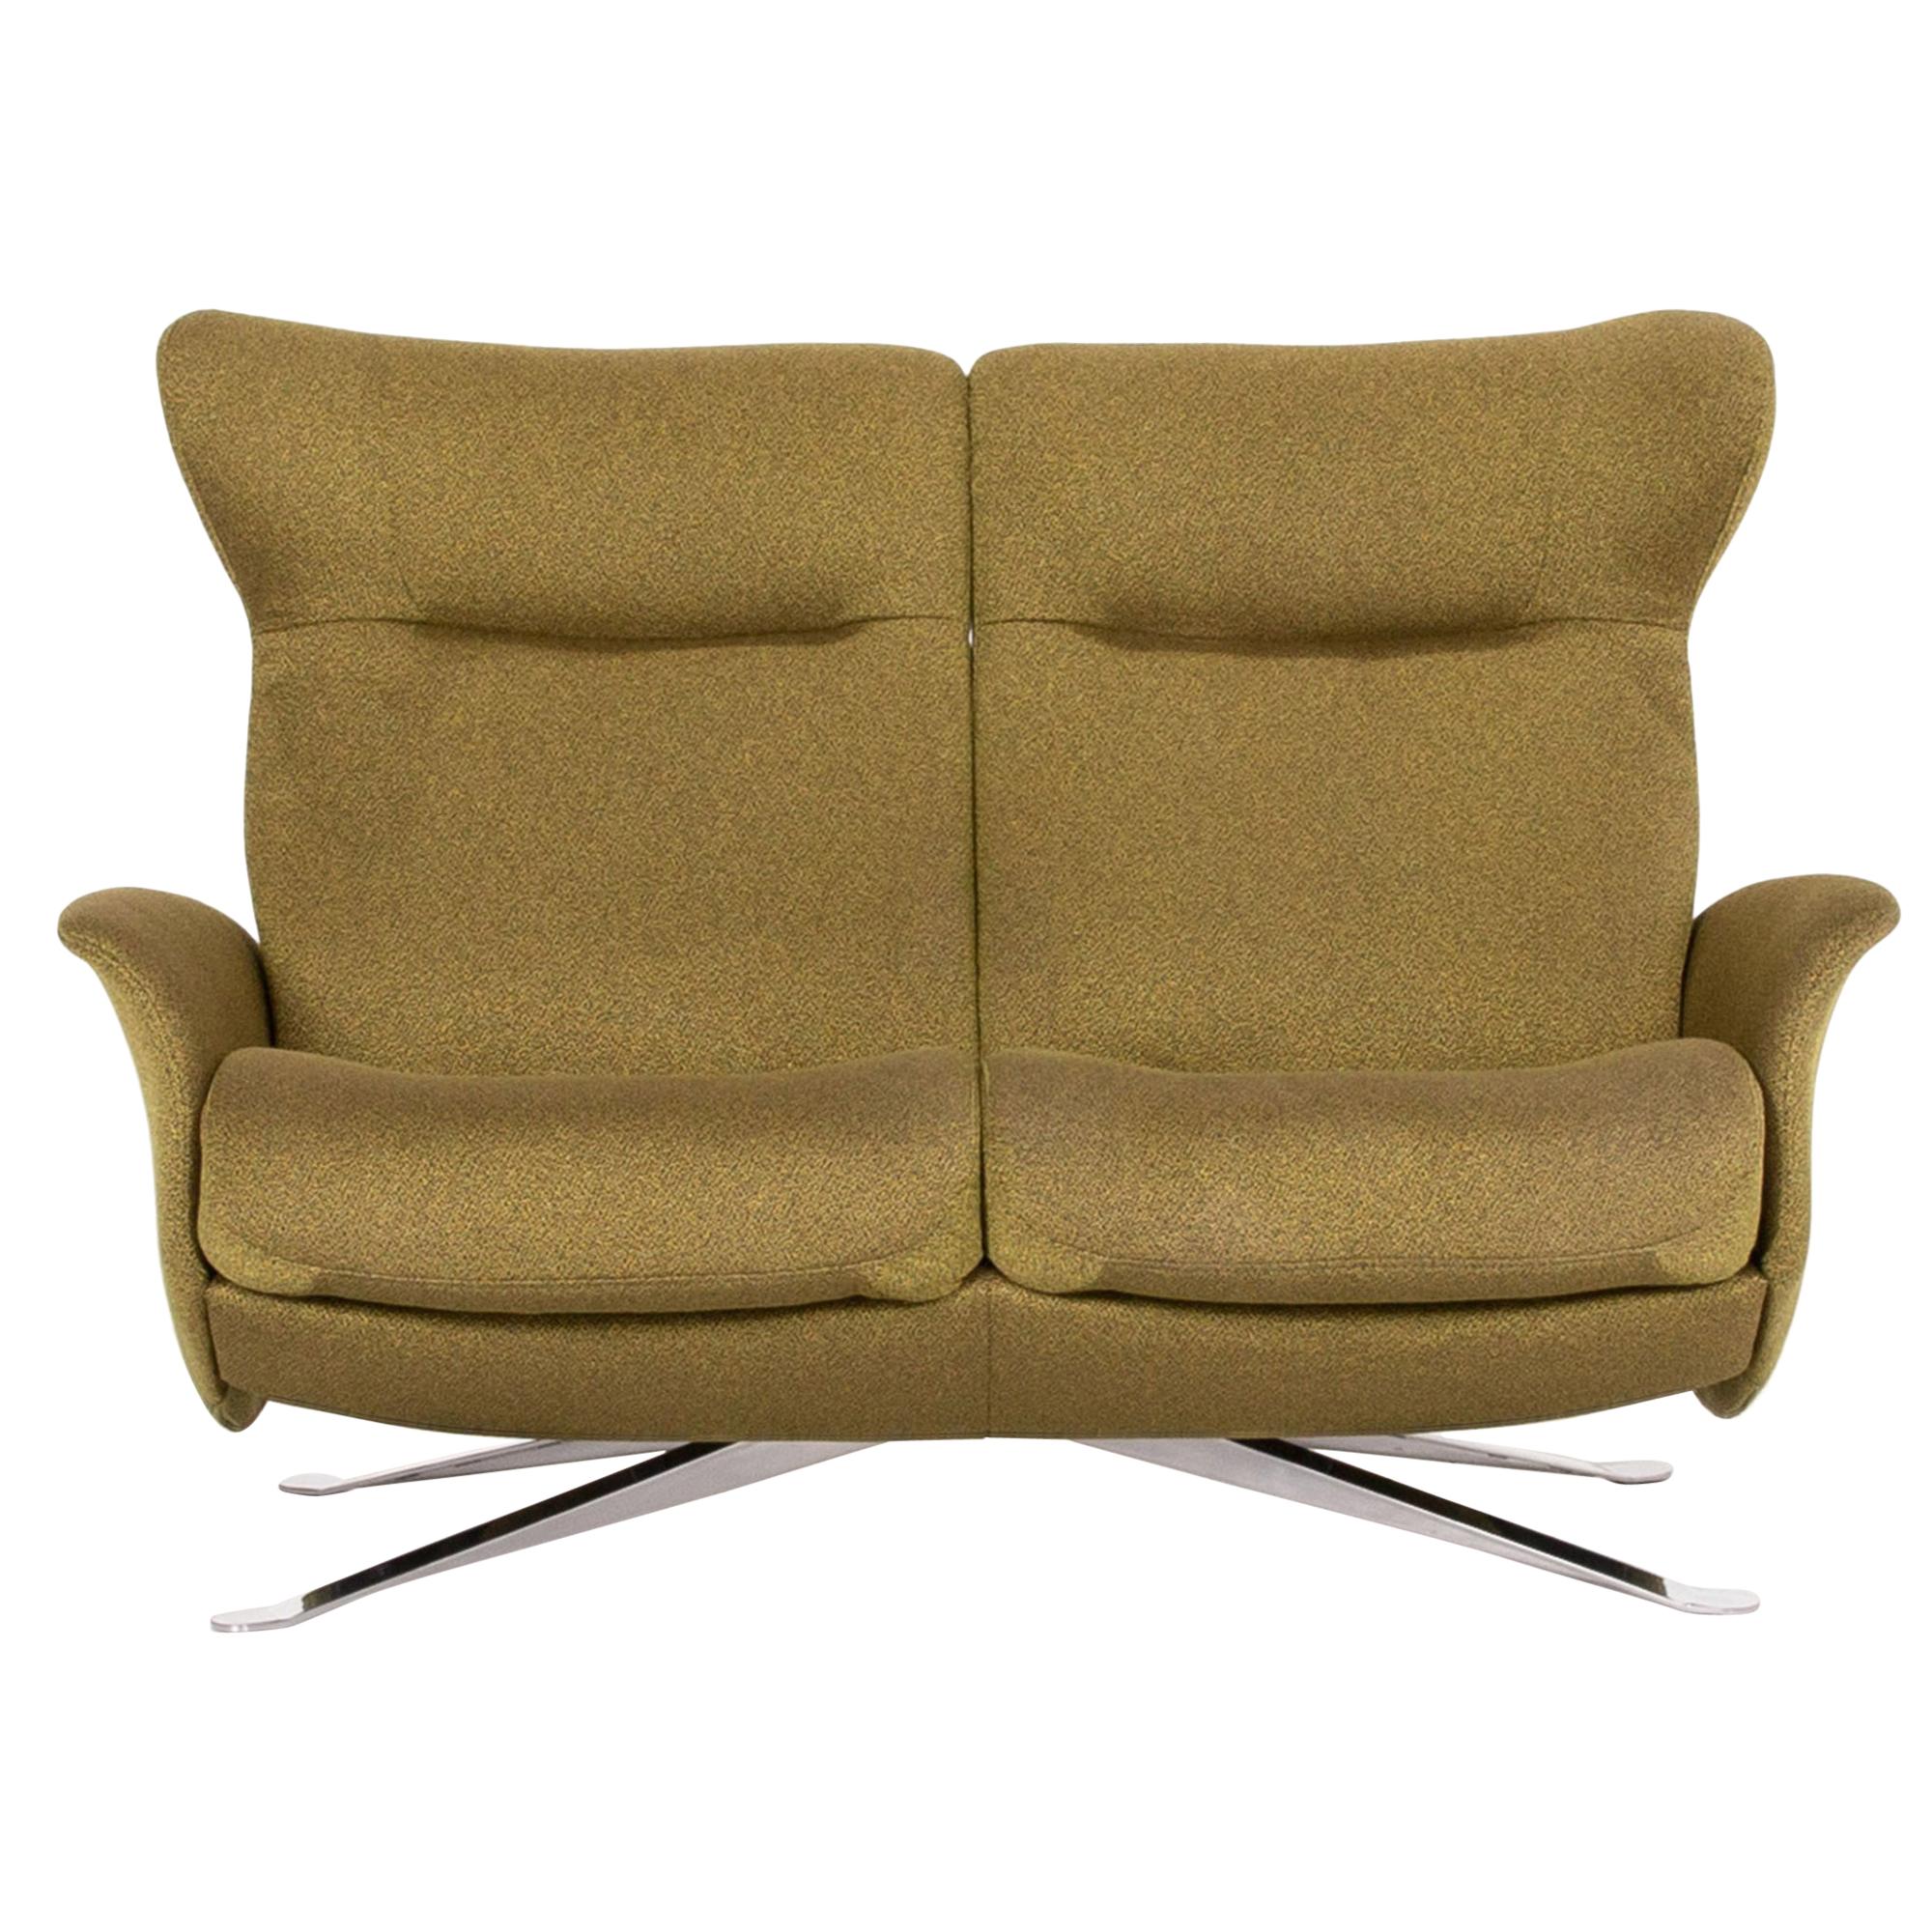 Joop Fabric Sofa Green Olive Green Two-Seat Relax Function Couch For Sale